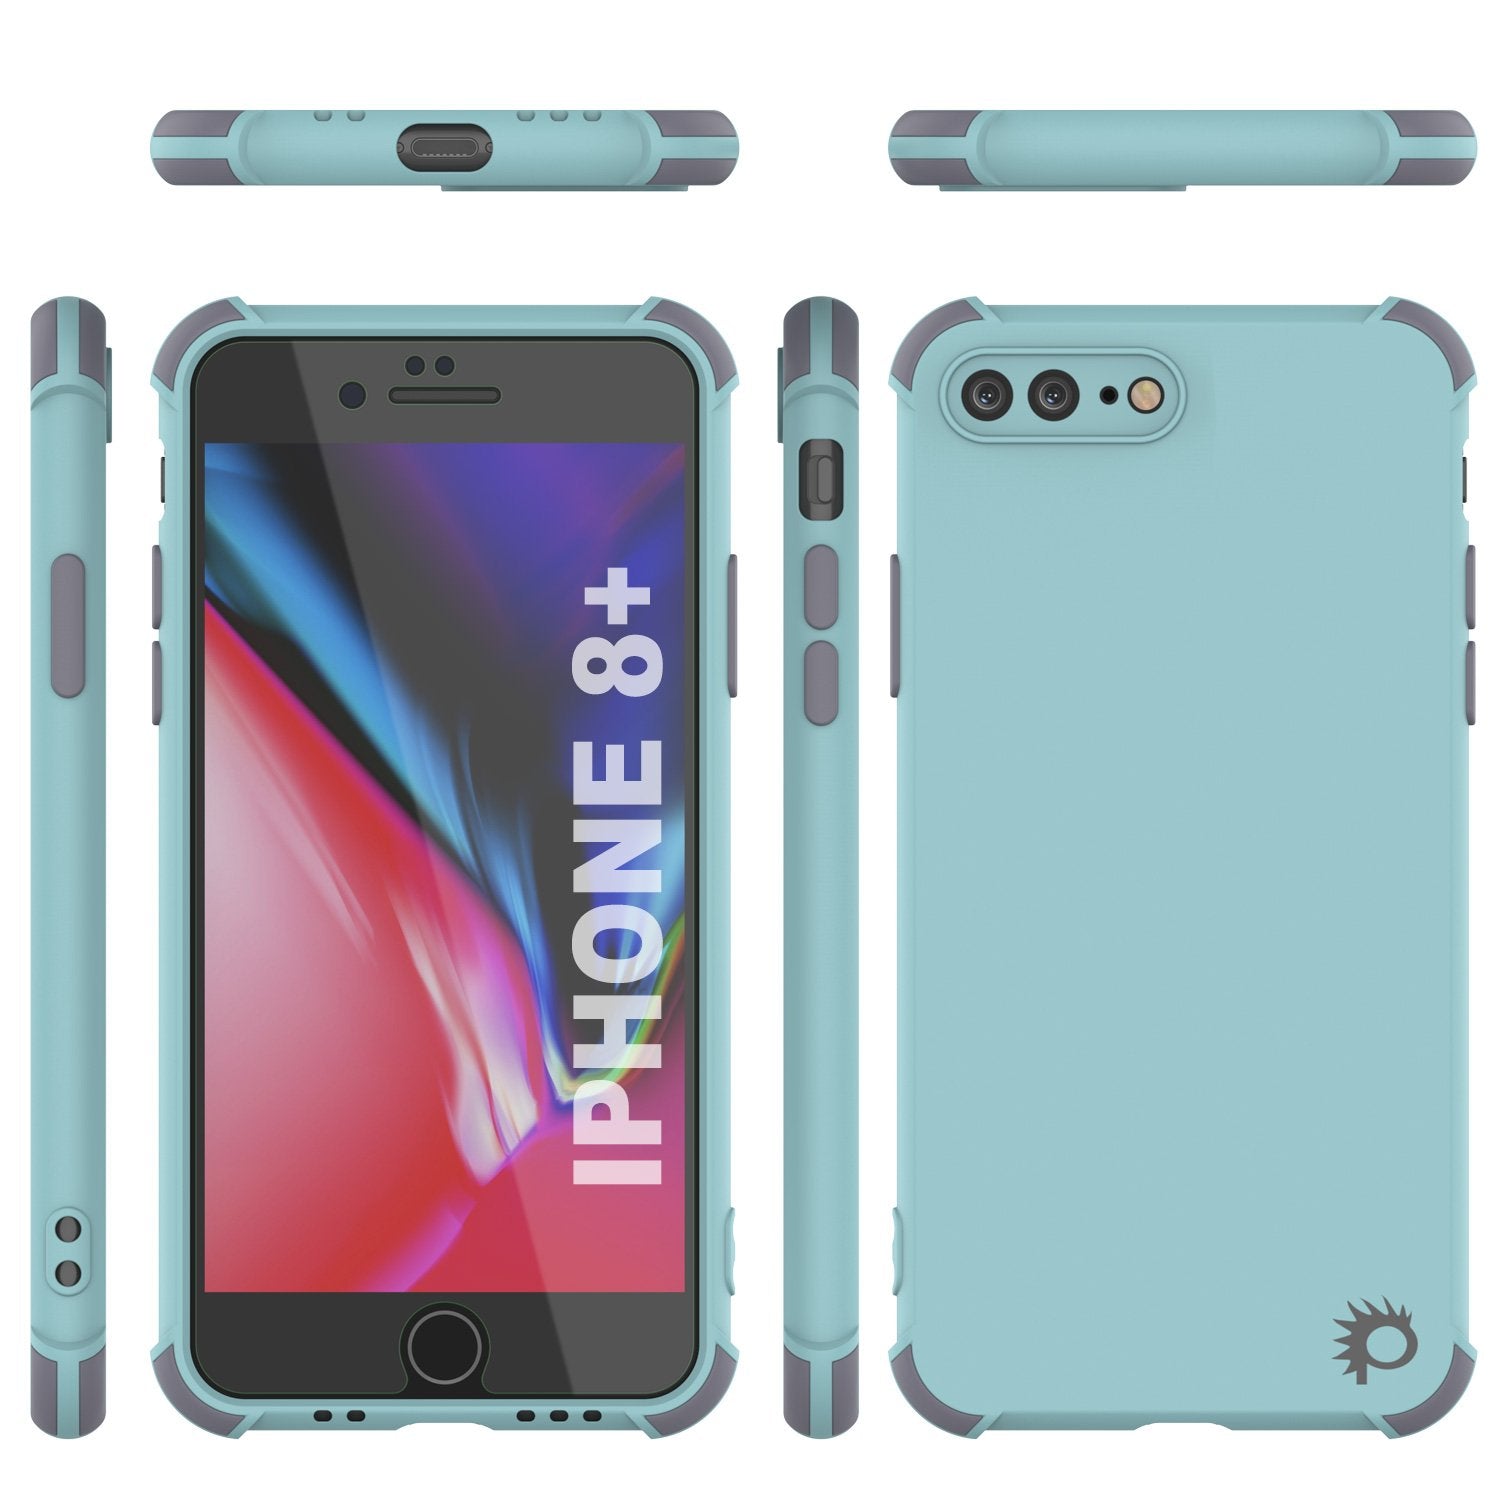 Punkcase Protective & Lightweight TPU Case [Sunshine Series] for iPhone 8+ Plus [Teal]